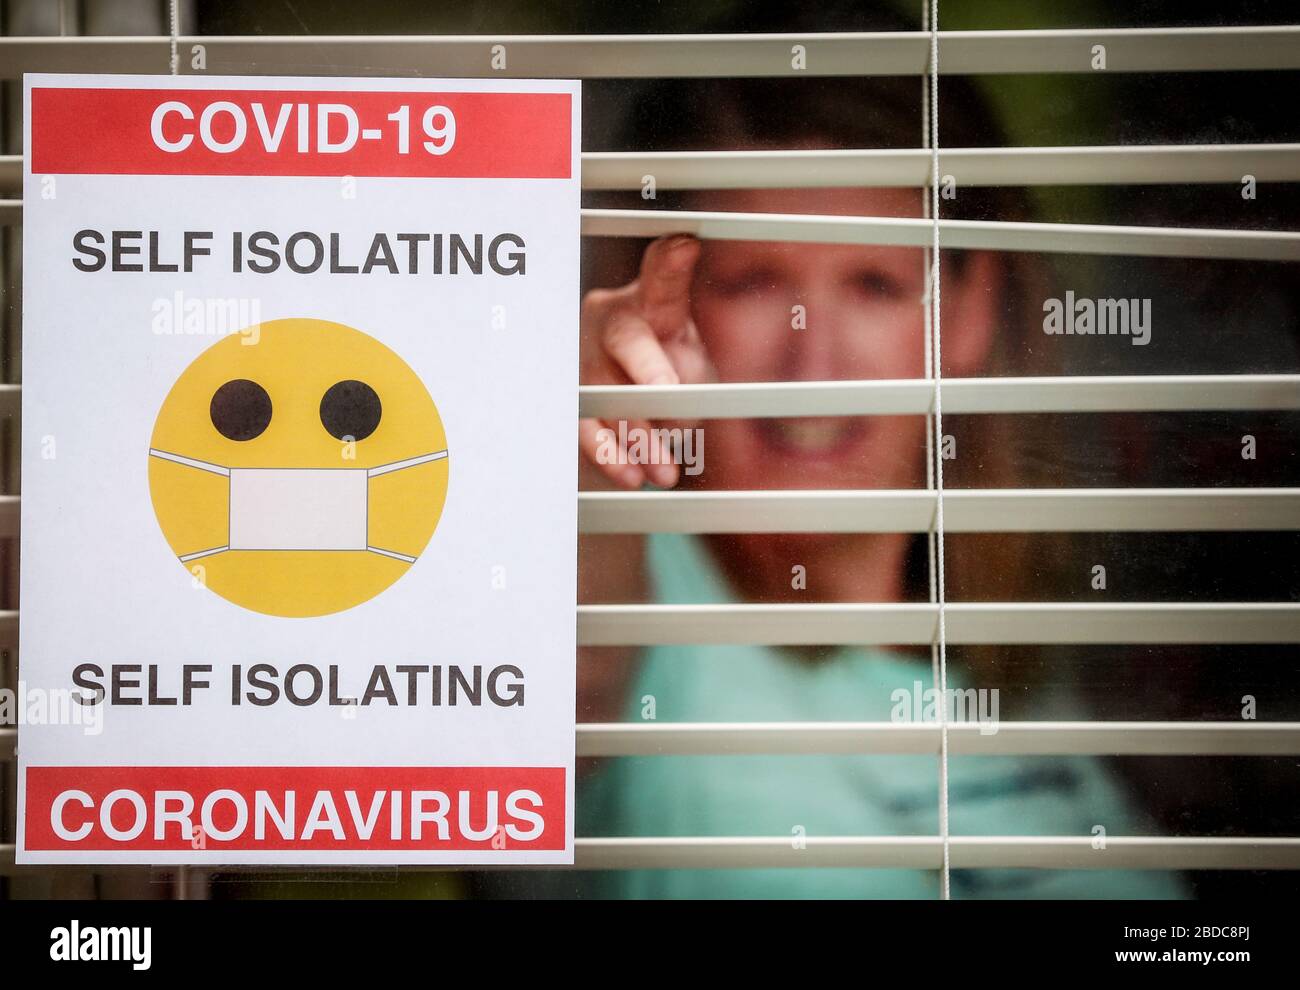 A woman in self isolation at home in the UK during the coronavirus Covid 19 pandemic. Stock Photo